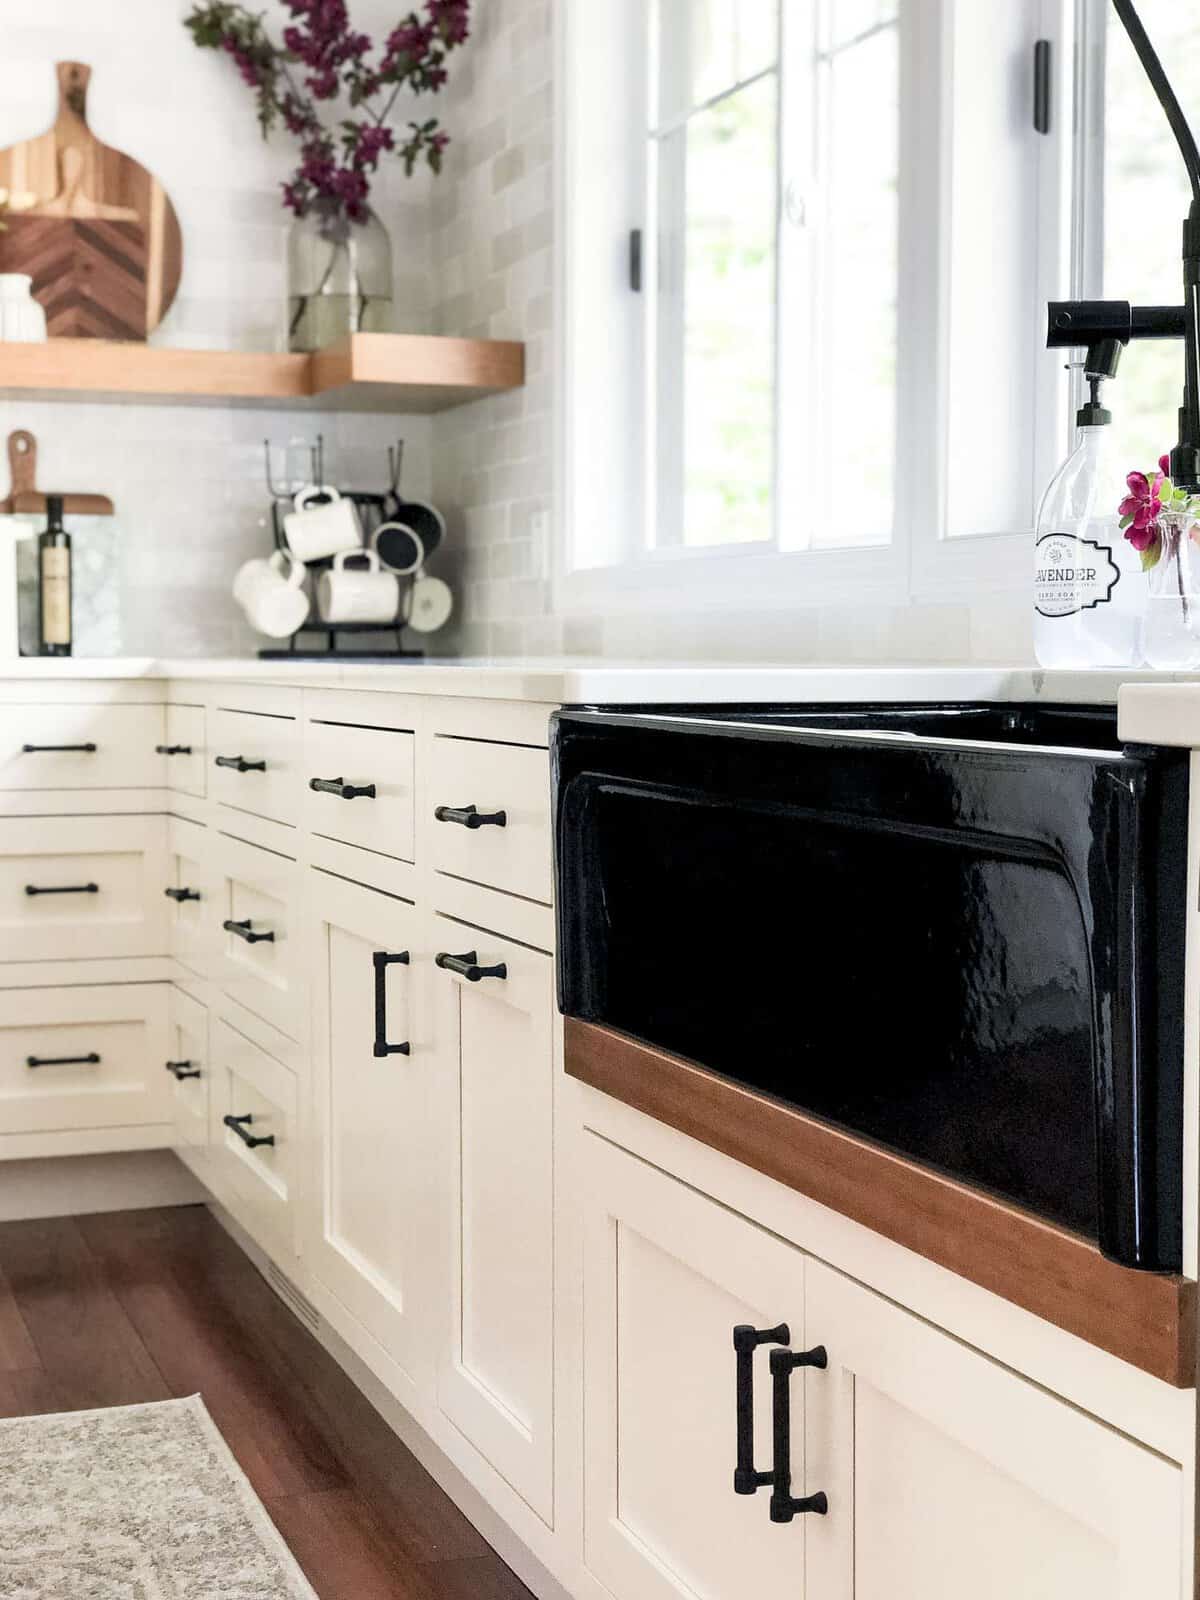 Do you love modern farmhouse style? Here are tips for how to use a black farmhouse sink to anchor your kitchen remodel design. Plus, how to mix finishes! #fromhousetohaven #blackfarmhousesink #farmhousesink